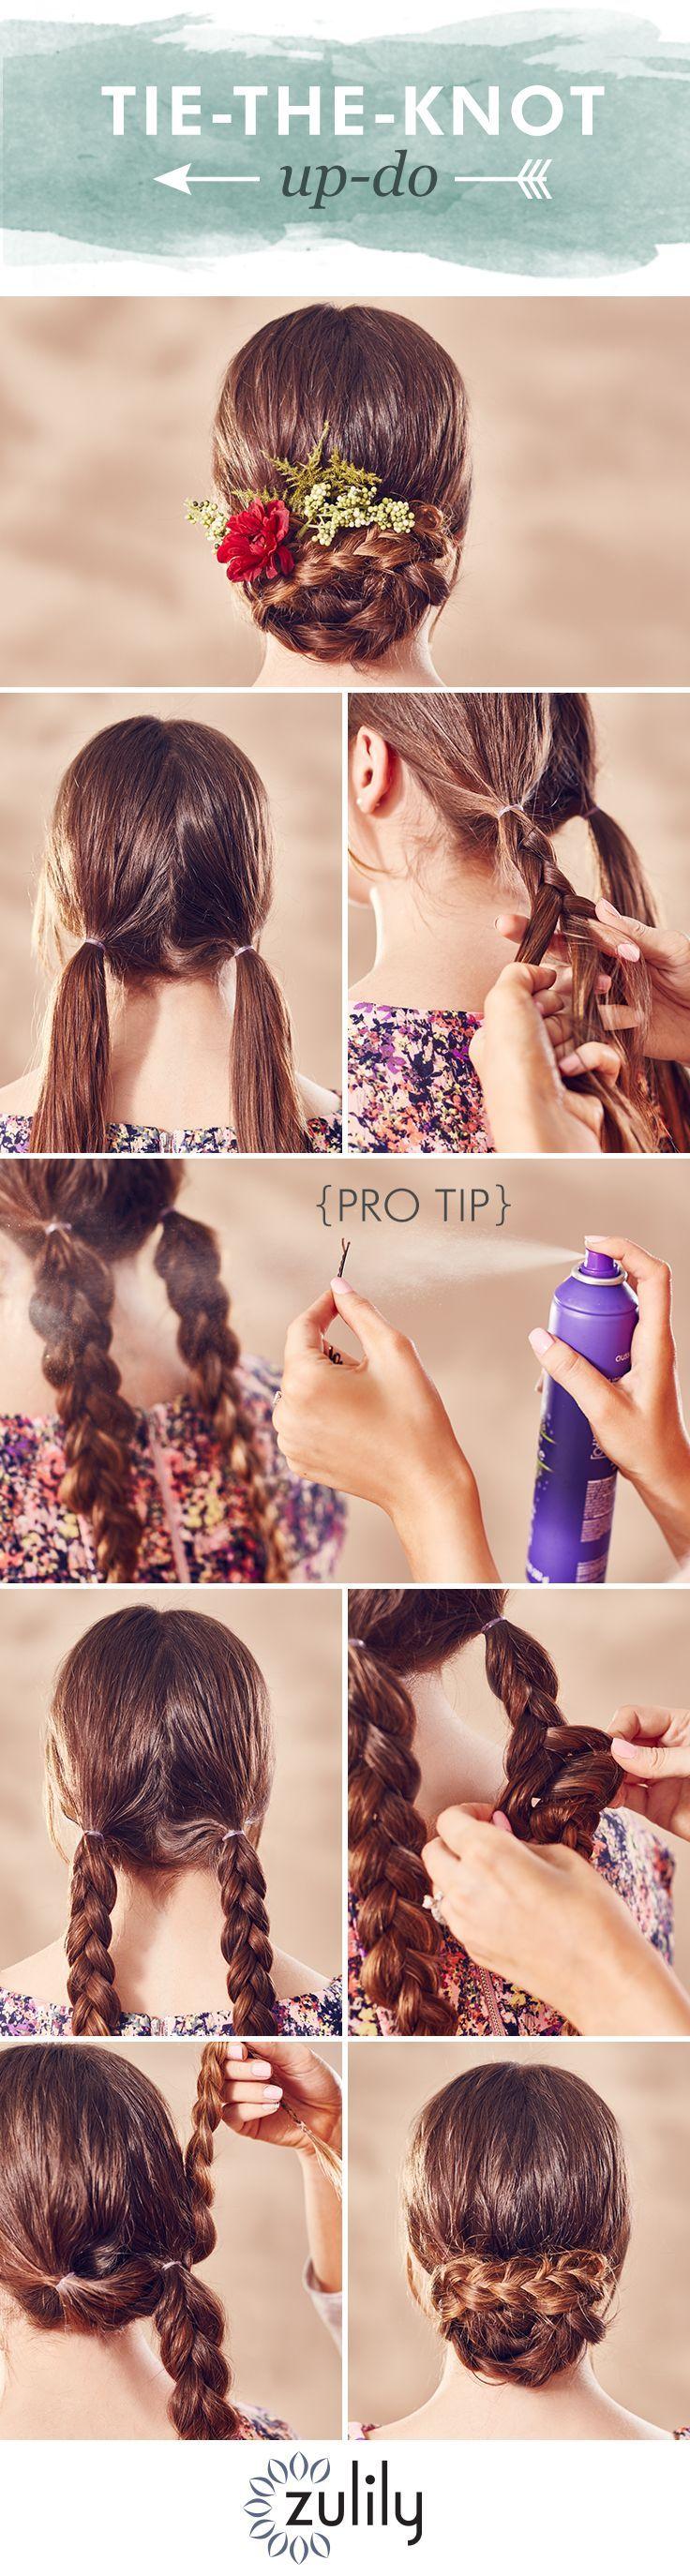 Hochzeit - Hair How-To: Tie The Knot With This Beautiful Braided Style